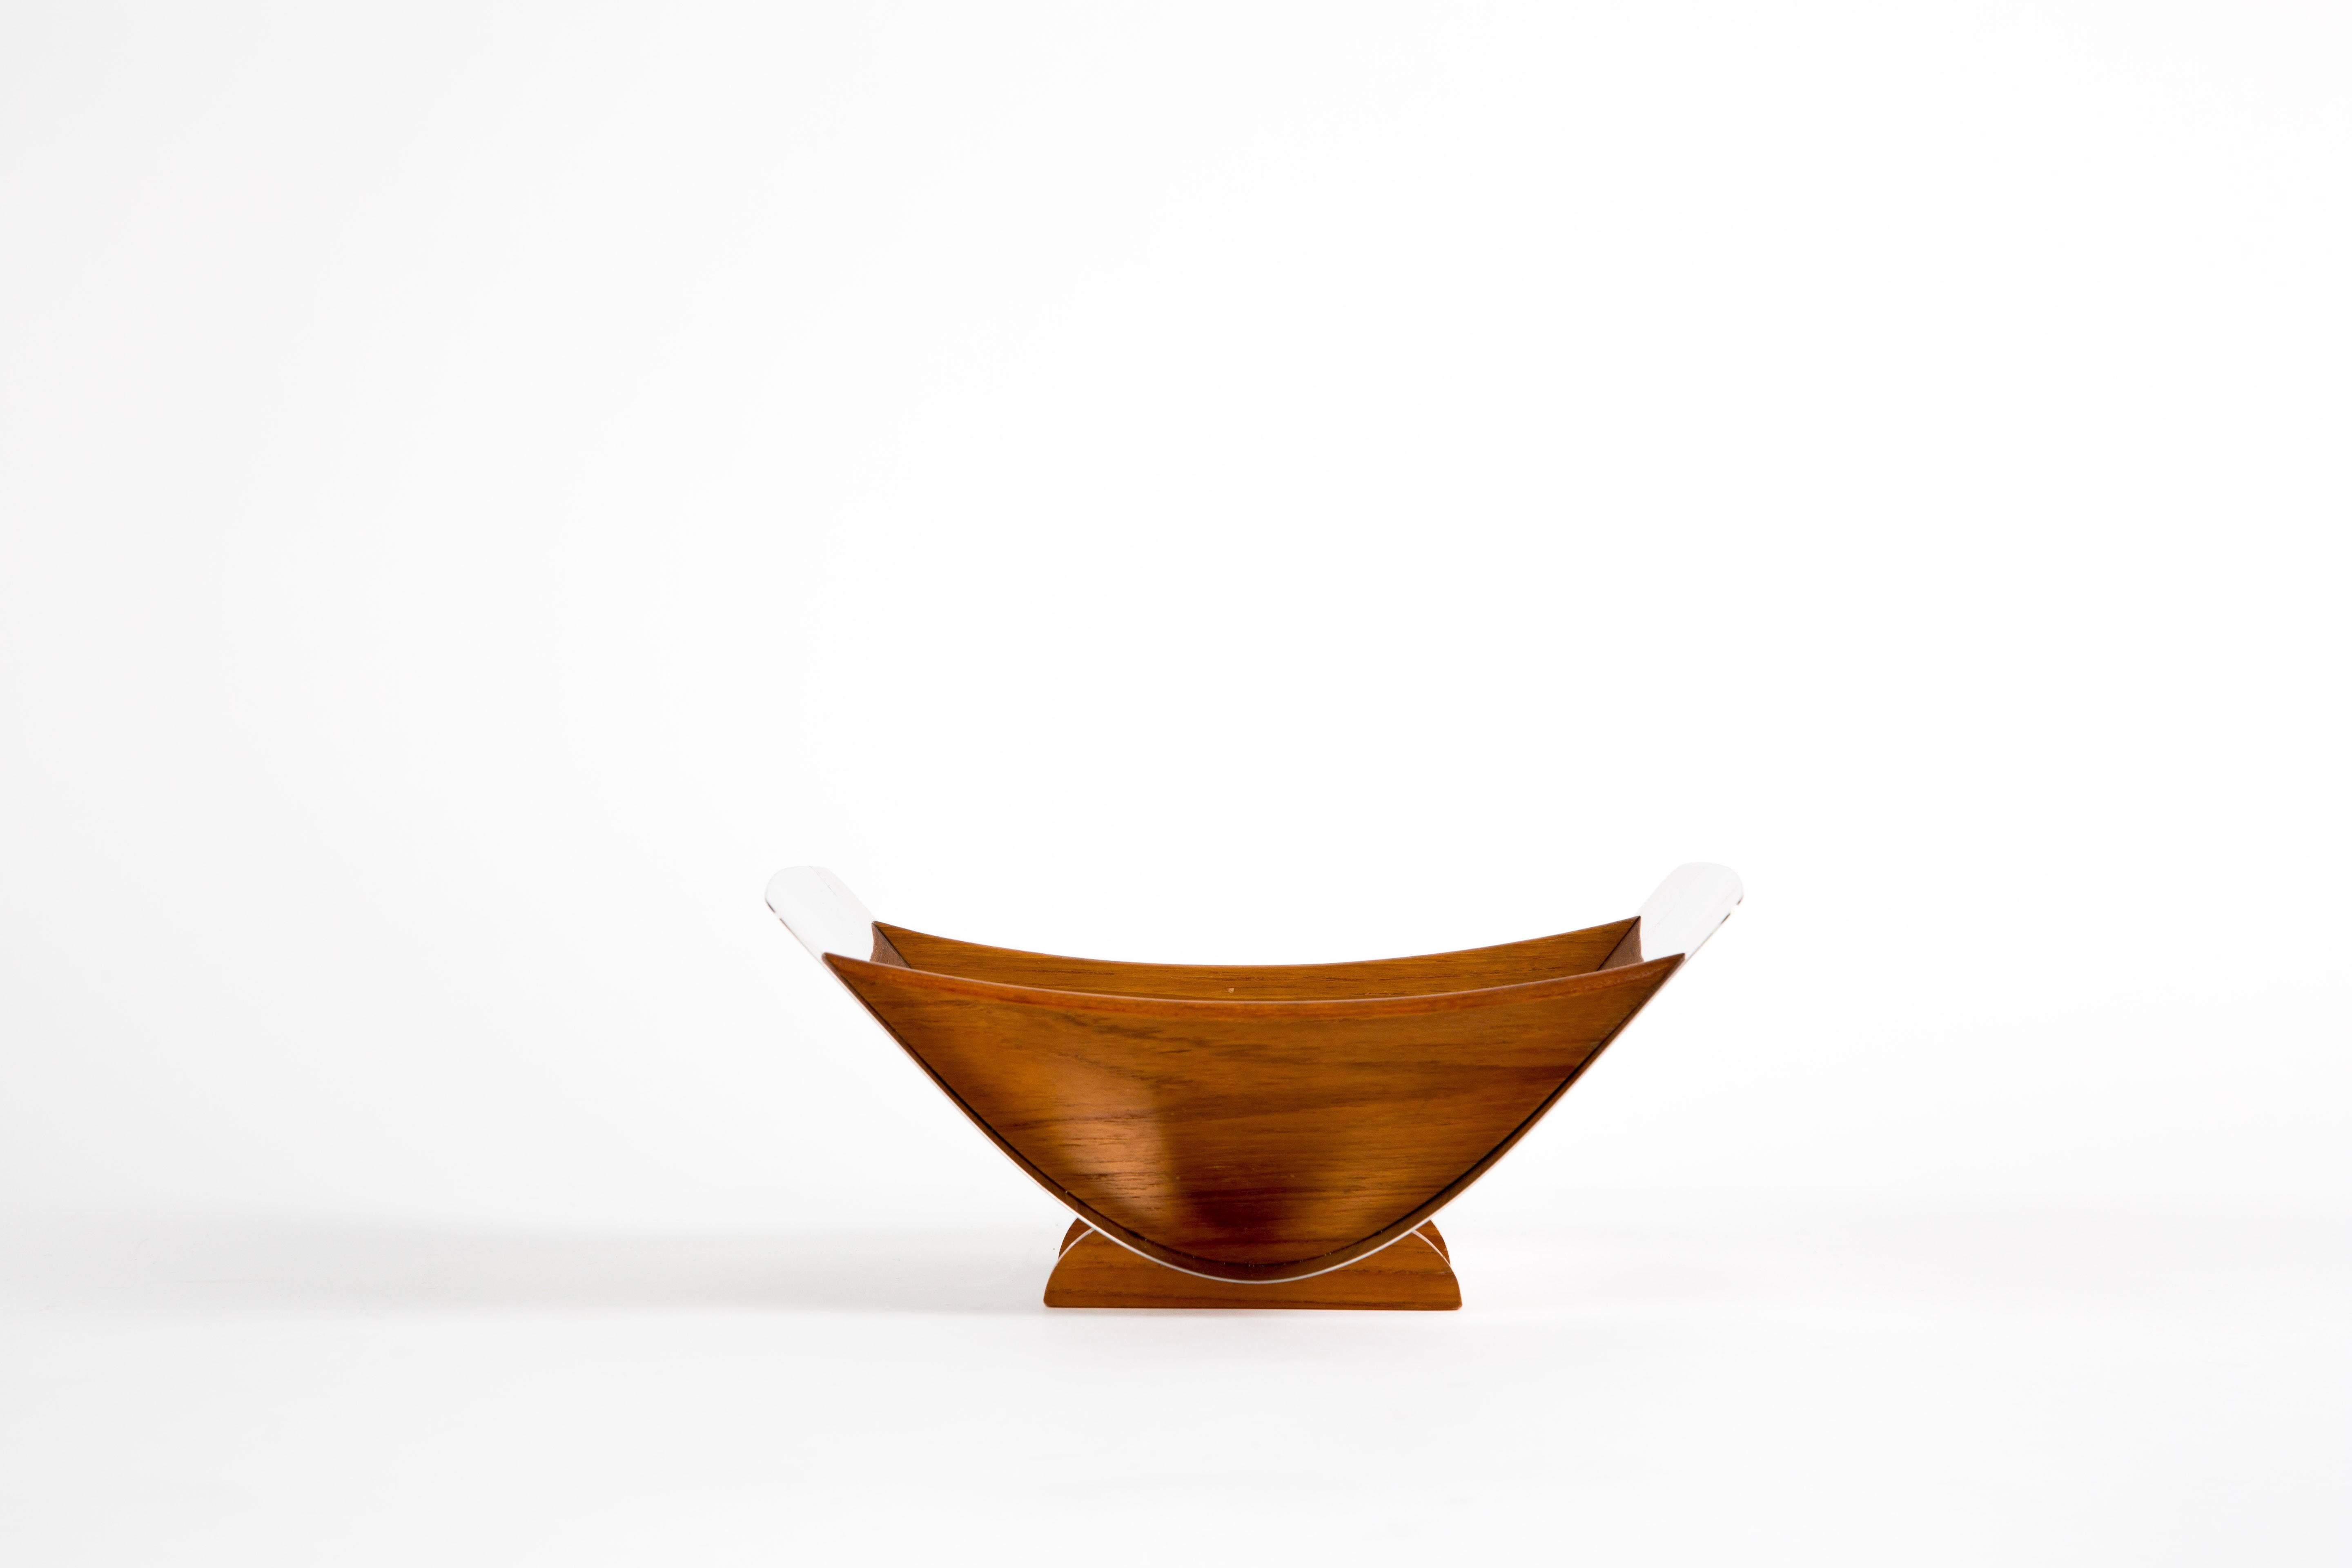 FRUIT BOWL STAINLESS STEE. A fruit bowl from Sweden. Stainless steel and teak. Organic form. Marked with 18/8 stainless Sweden AS. Arthur Salm.